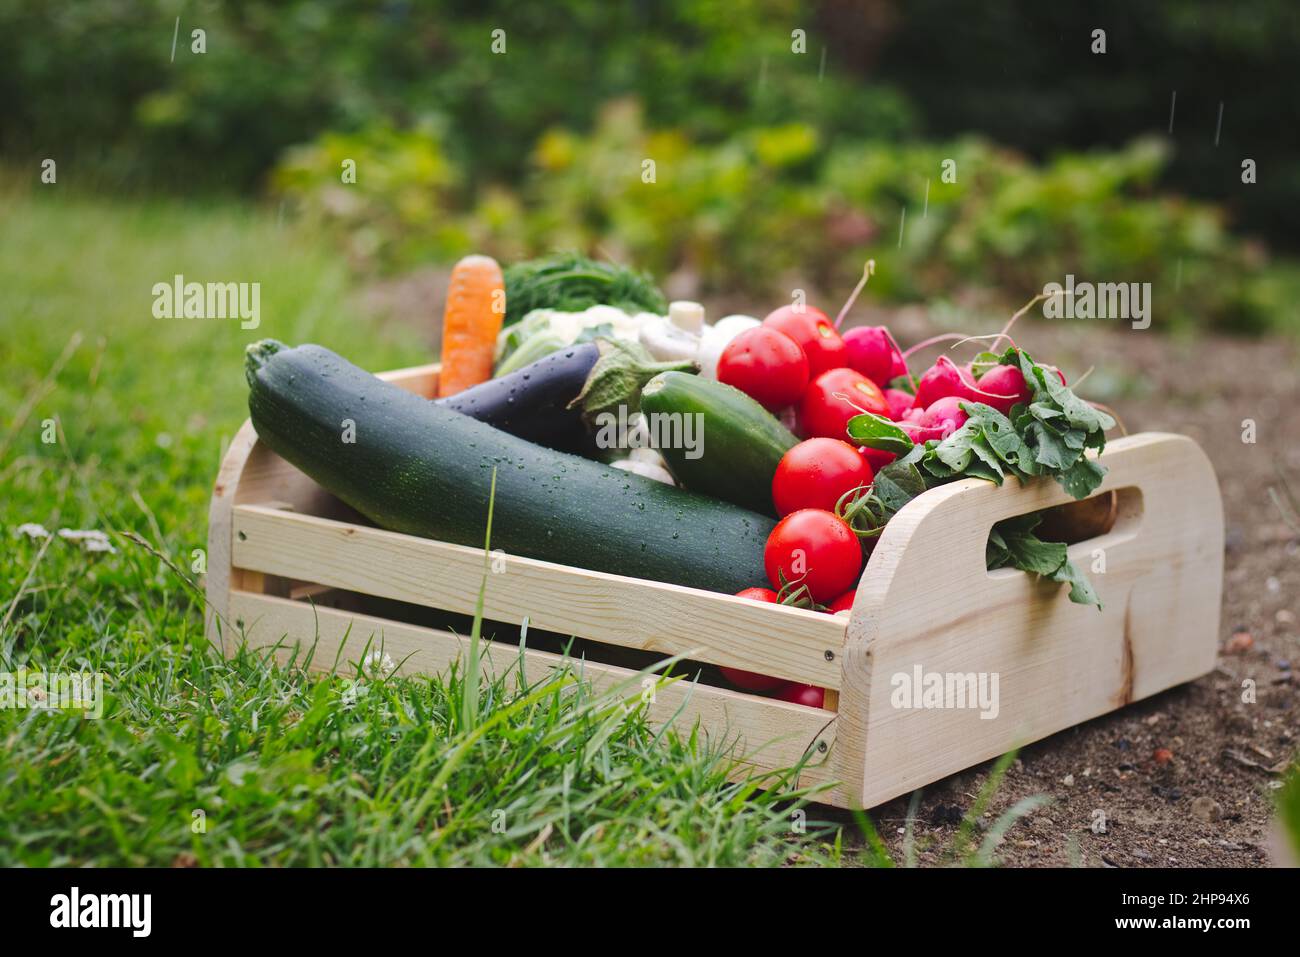 Wooden crate full of vegetables in garden. Harvest in organic farm.  Zucchini, tomatoes, radish, carrot, cauliflower, eggplant in wooden box  Stock Photo - Alamy